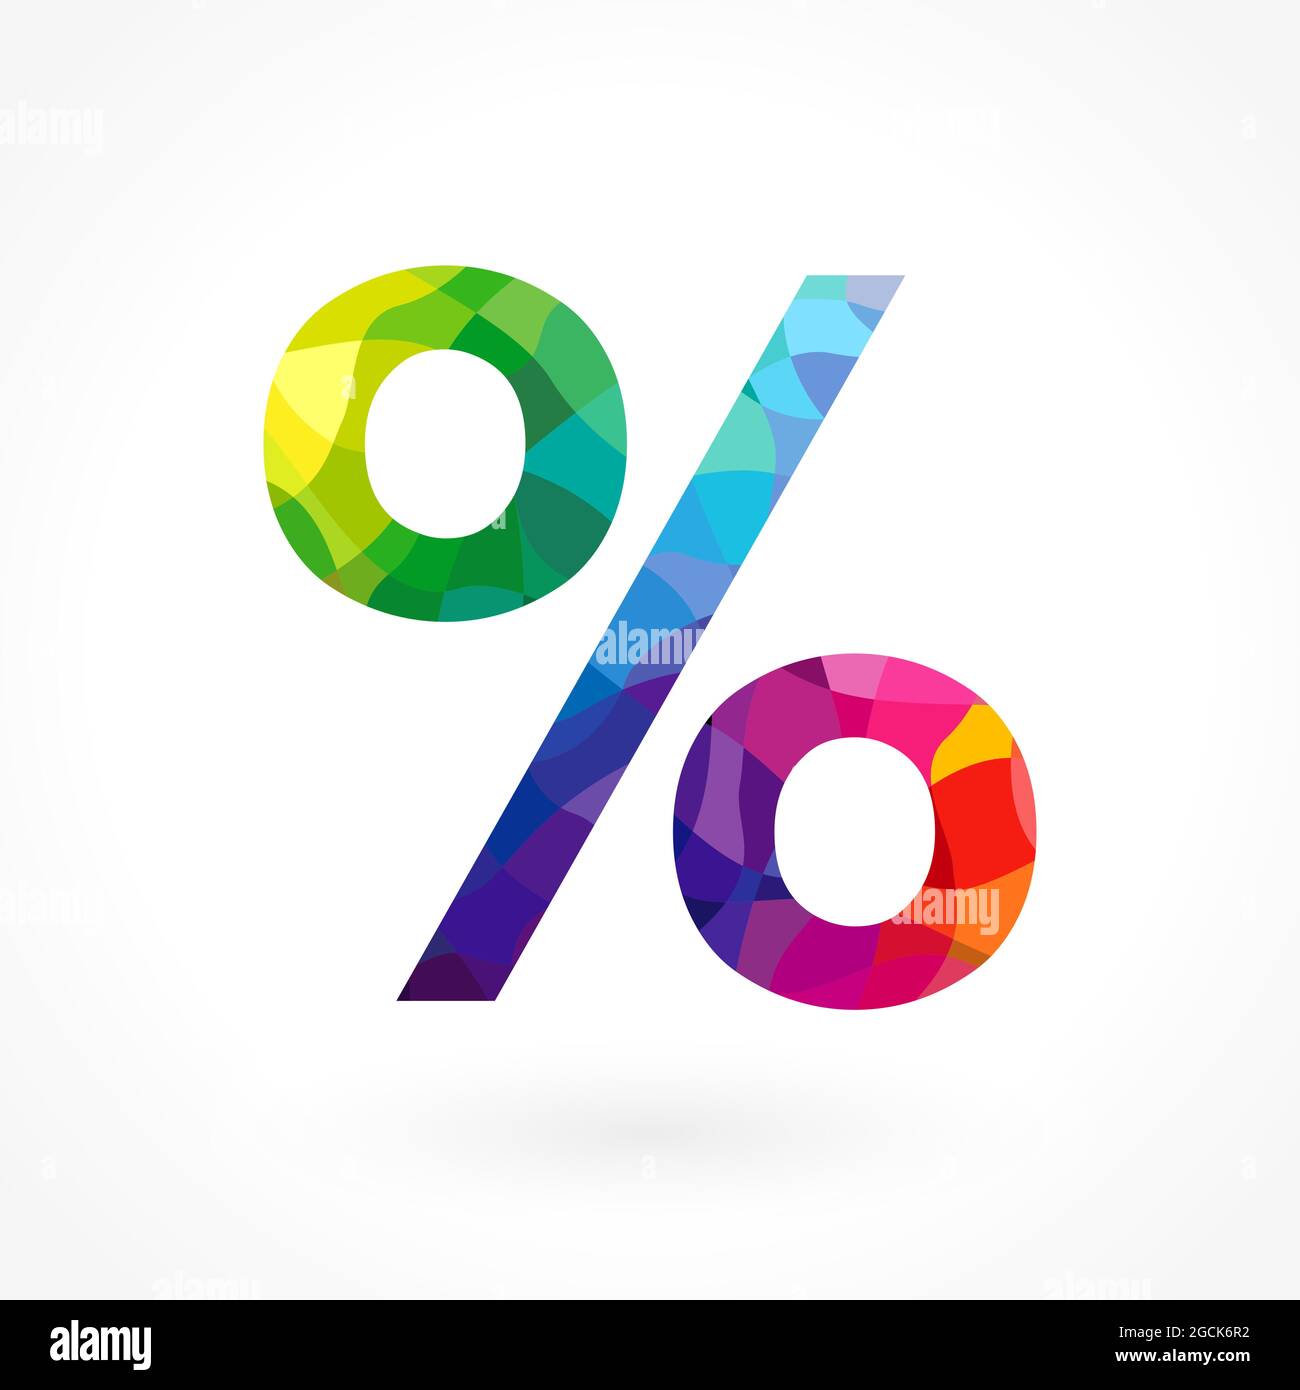 Percentage sign. Decorative colour icon for discount, sale and other business. Isolated abstract graphic design template. Stained-glass rainbow colore Stock Vector